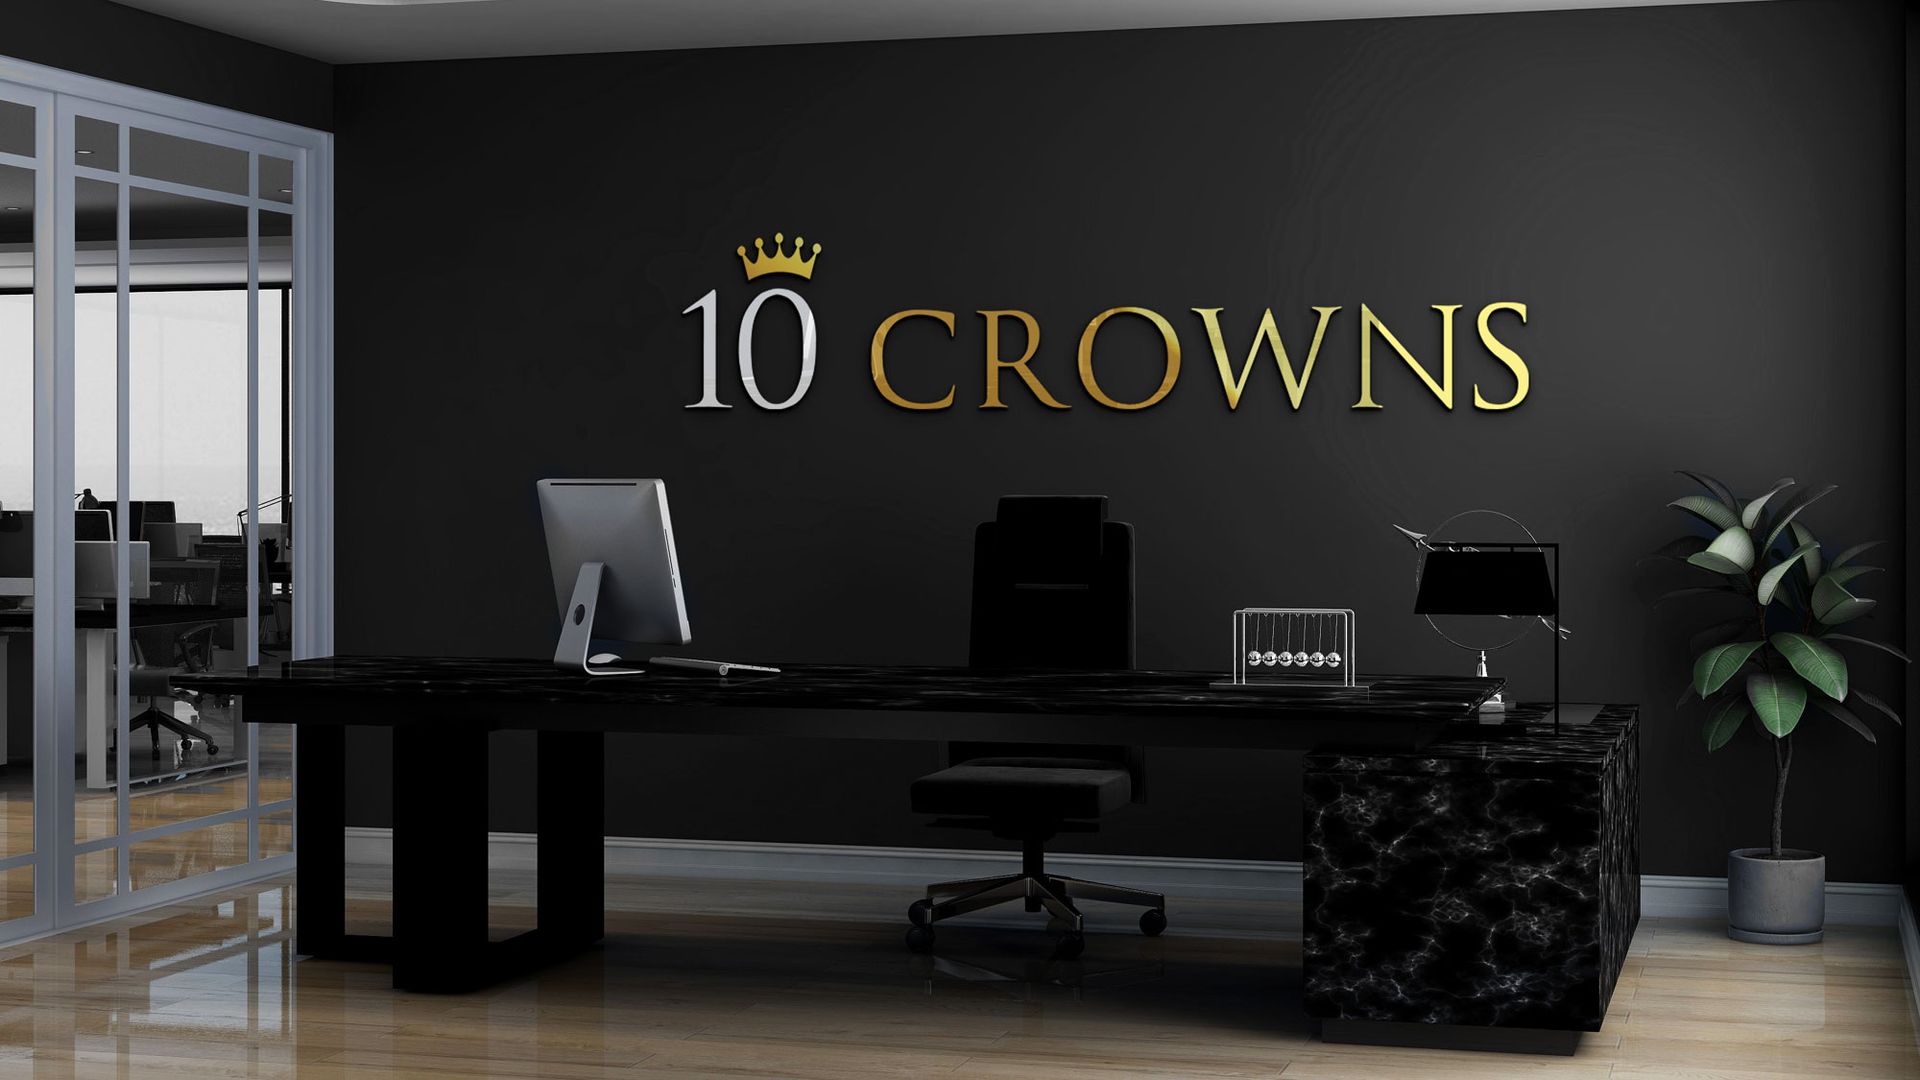 An office with the 10 crowns logo on the wall